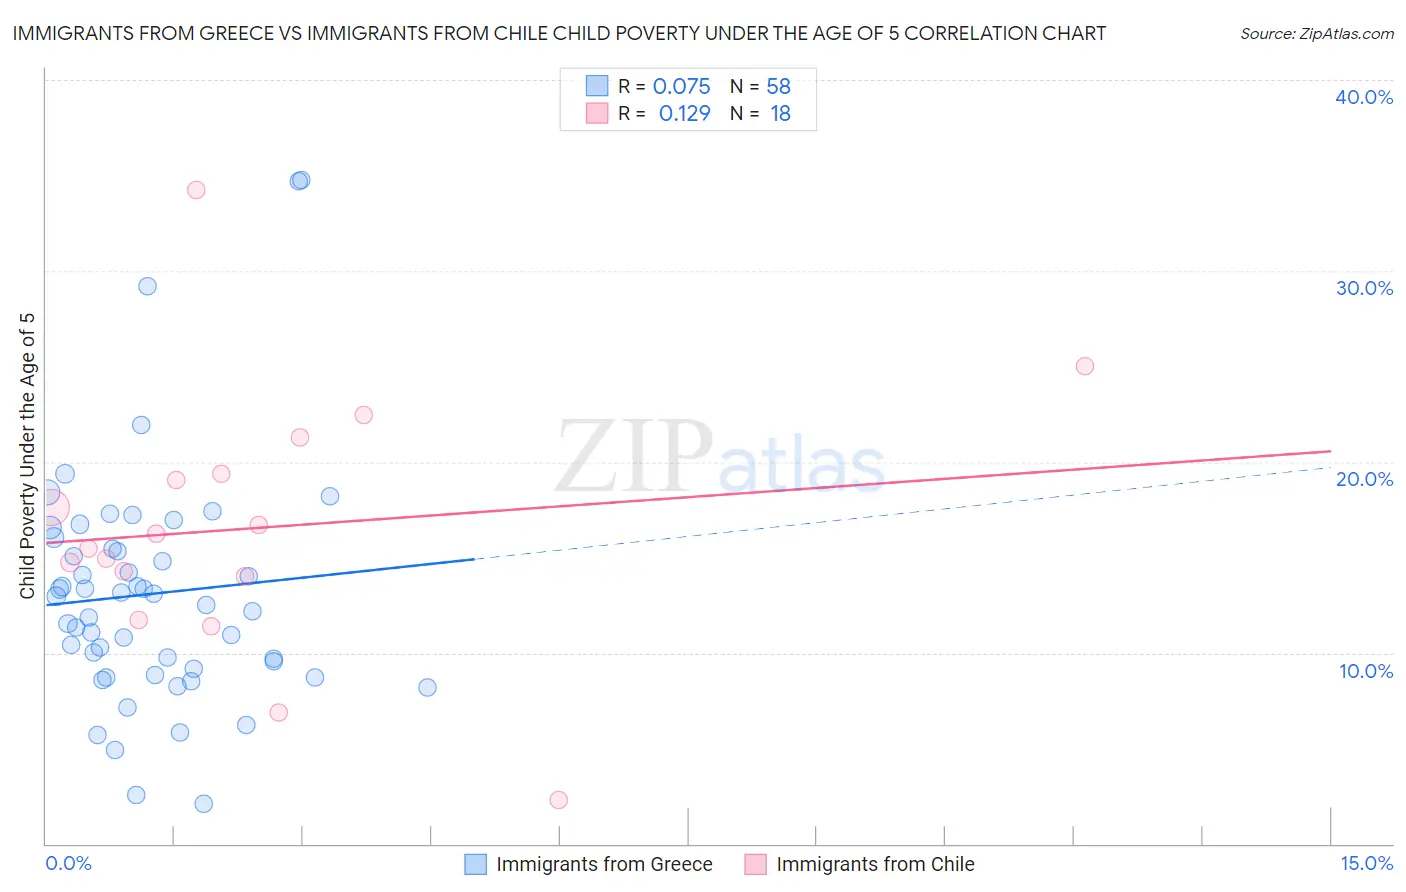 Immigrants from Greece vs Immigrants from Chile Child Poverty Under the Age of 5